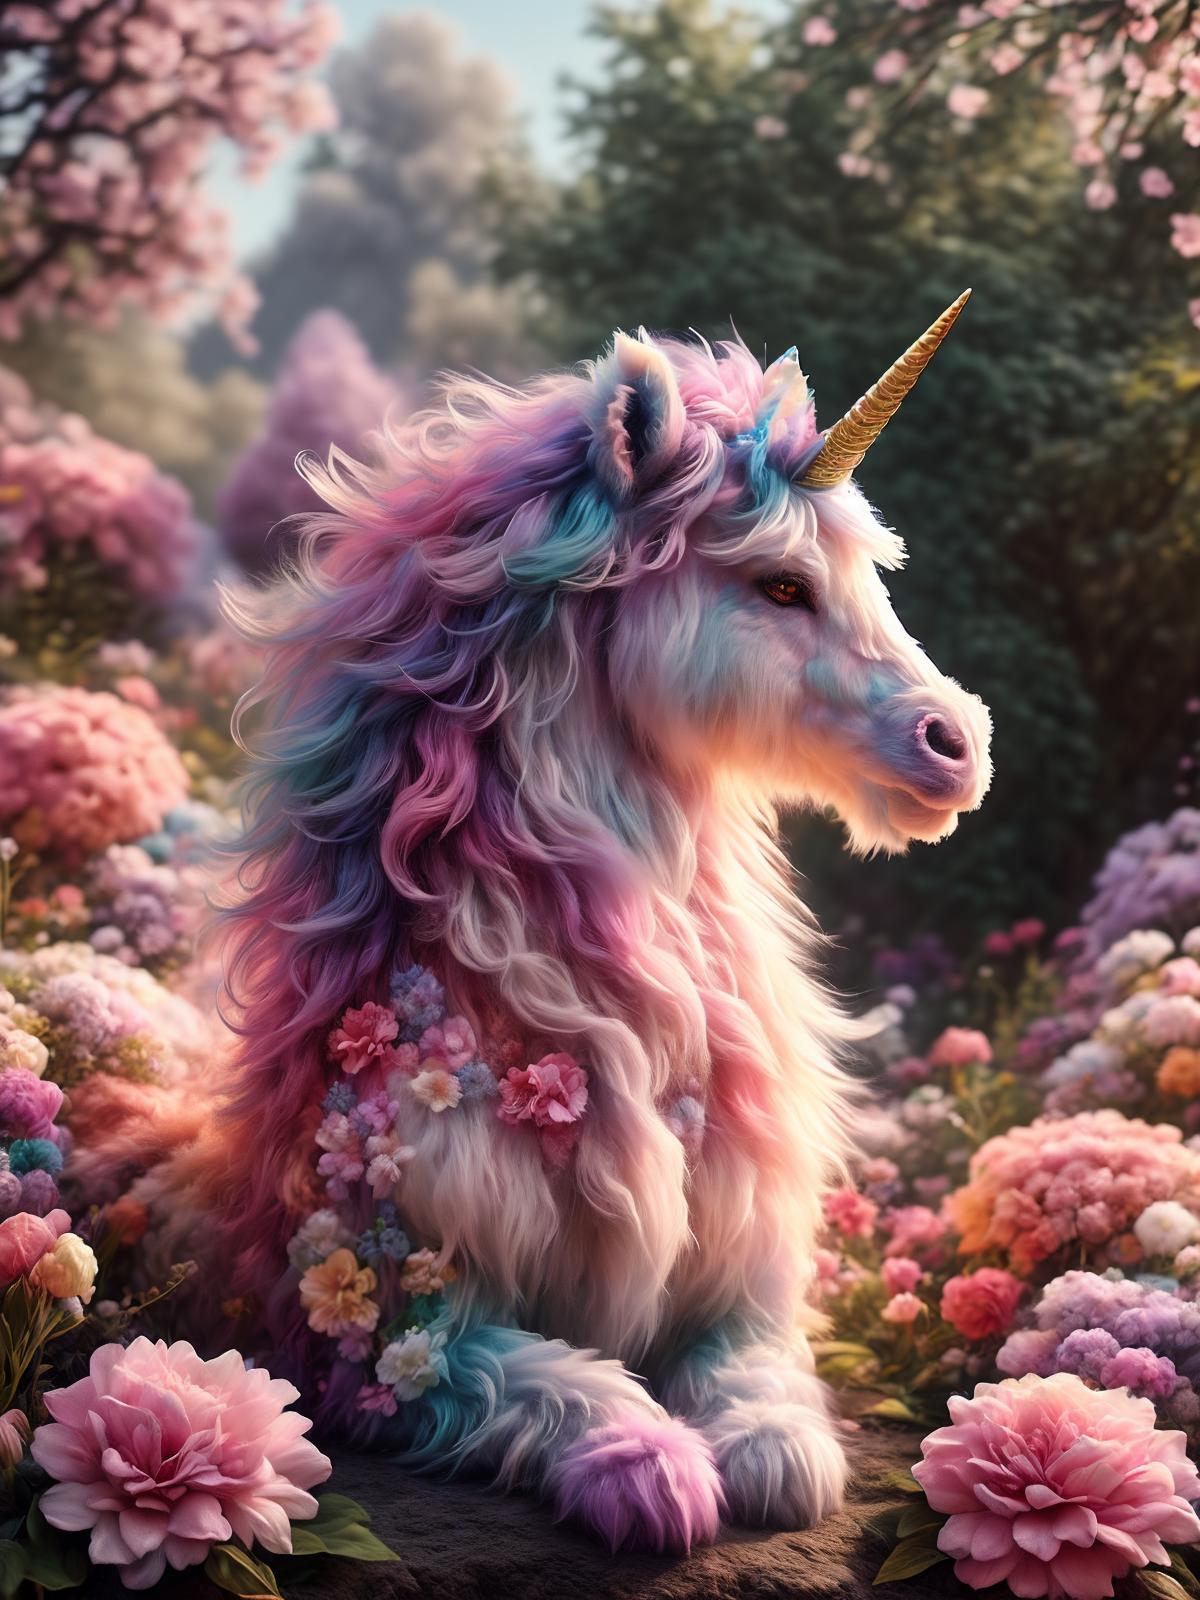 A Magical Pink and Purple Unicorn with a Long Pink Tail and Pink Flowers in the Background.